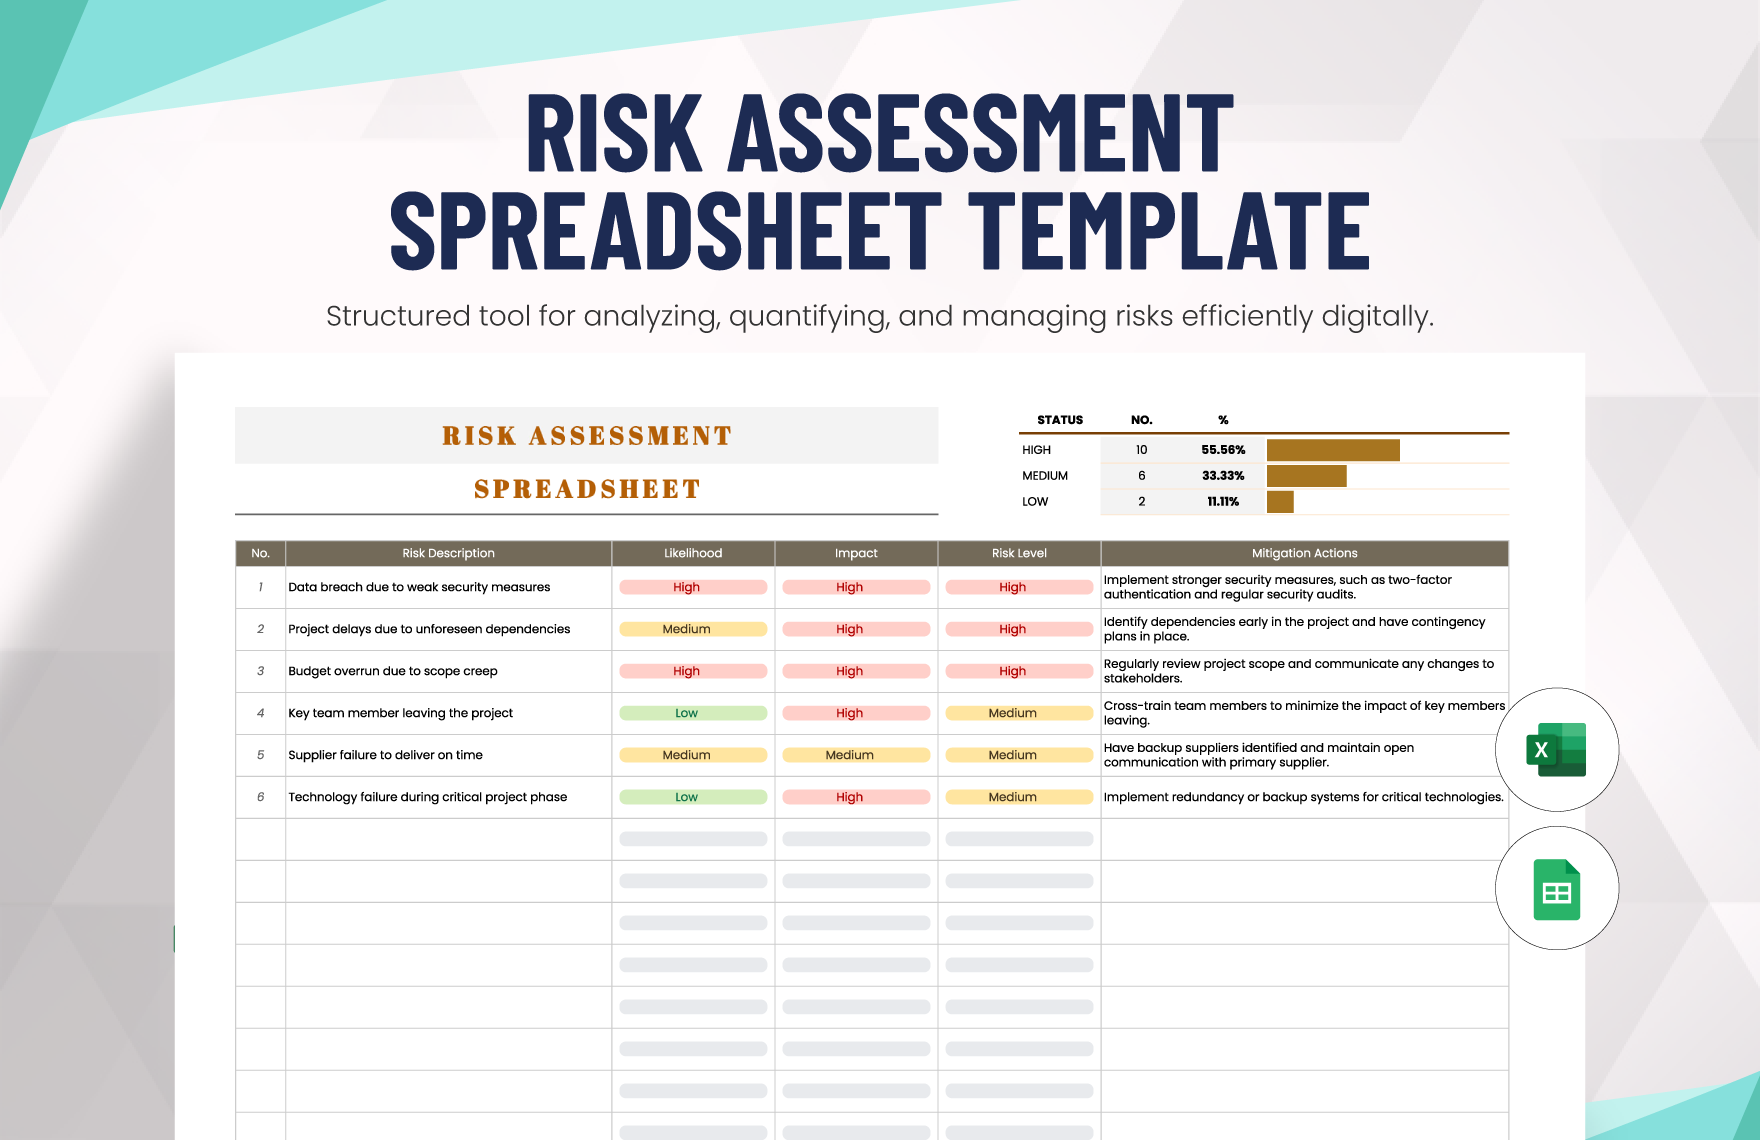 Free Risk Assessment Spreadsheet Template in Excel, Google Sheets